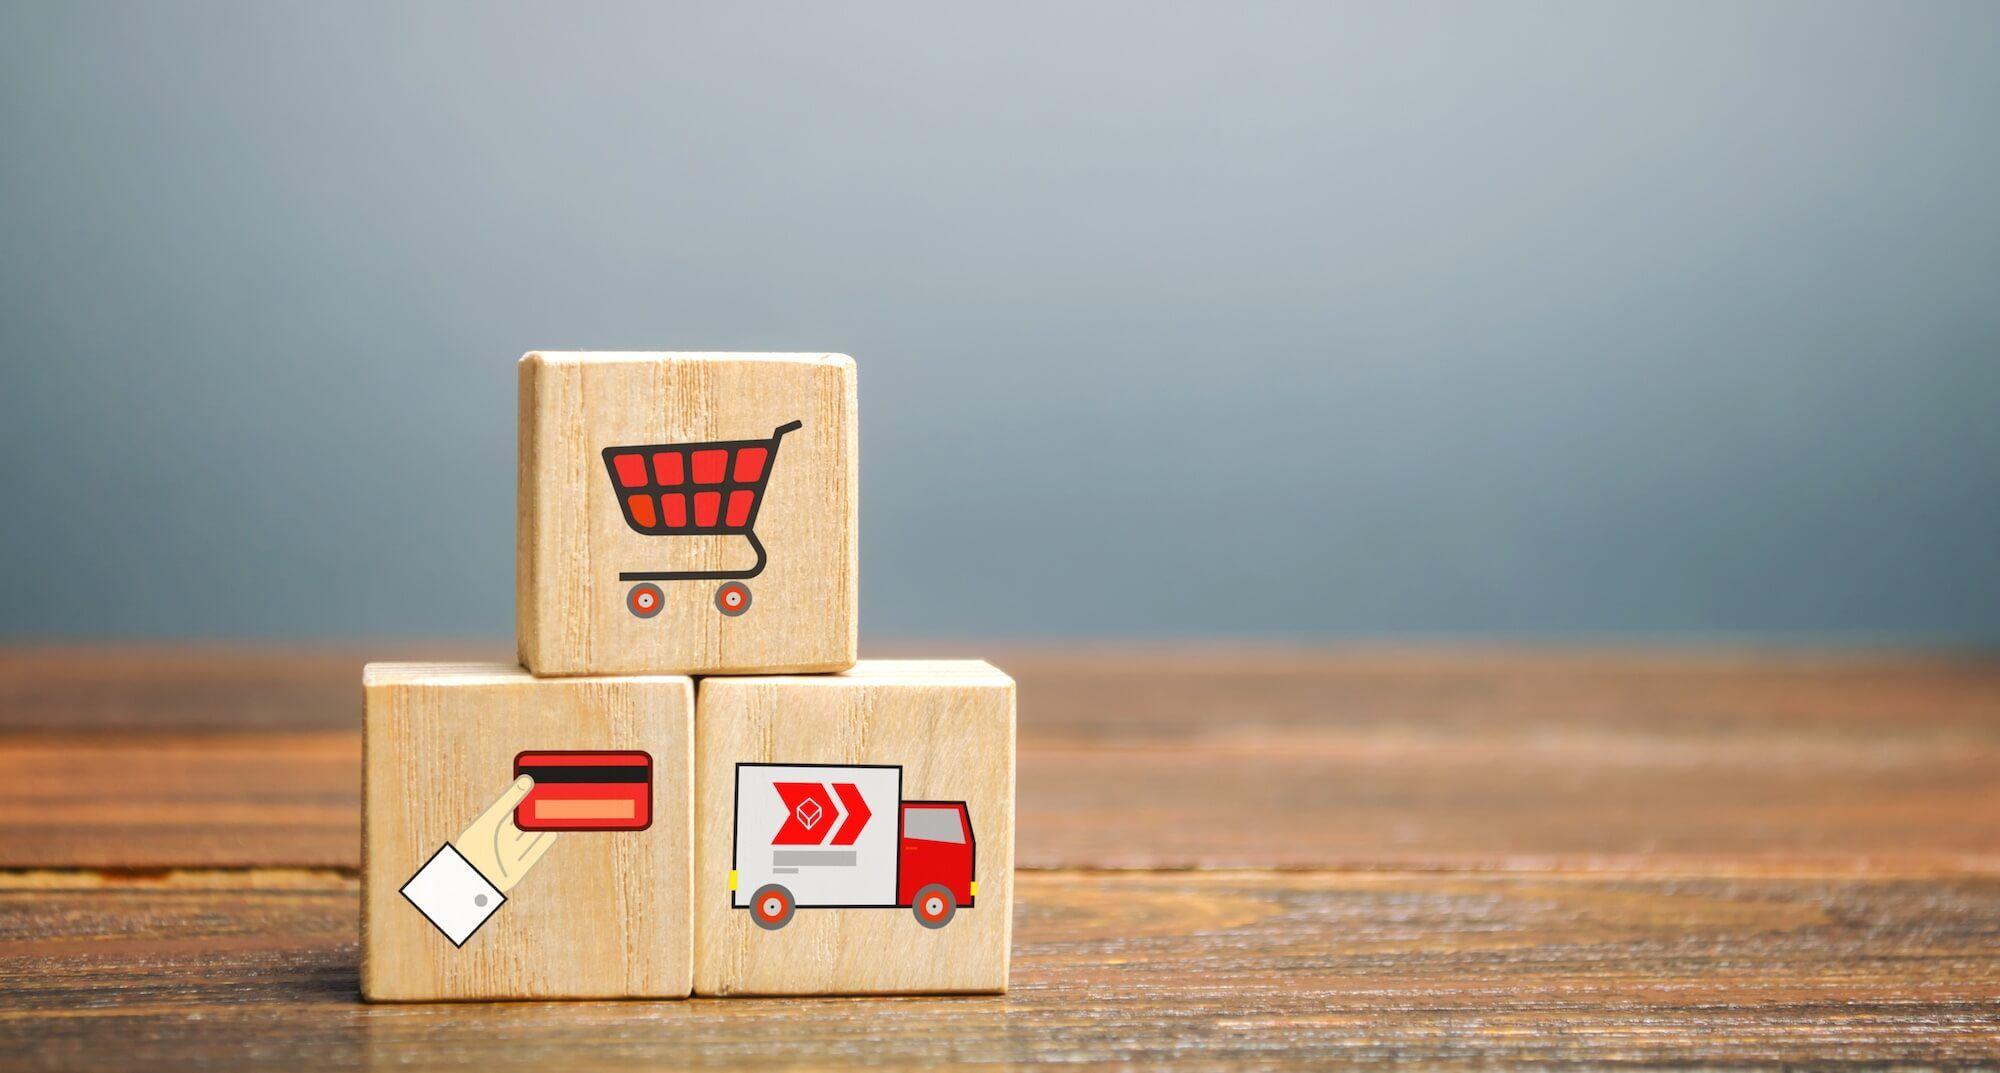 Online shopping icons for shopping cart, online payment and delivery on wooden cubes